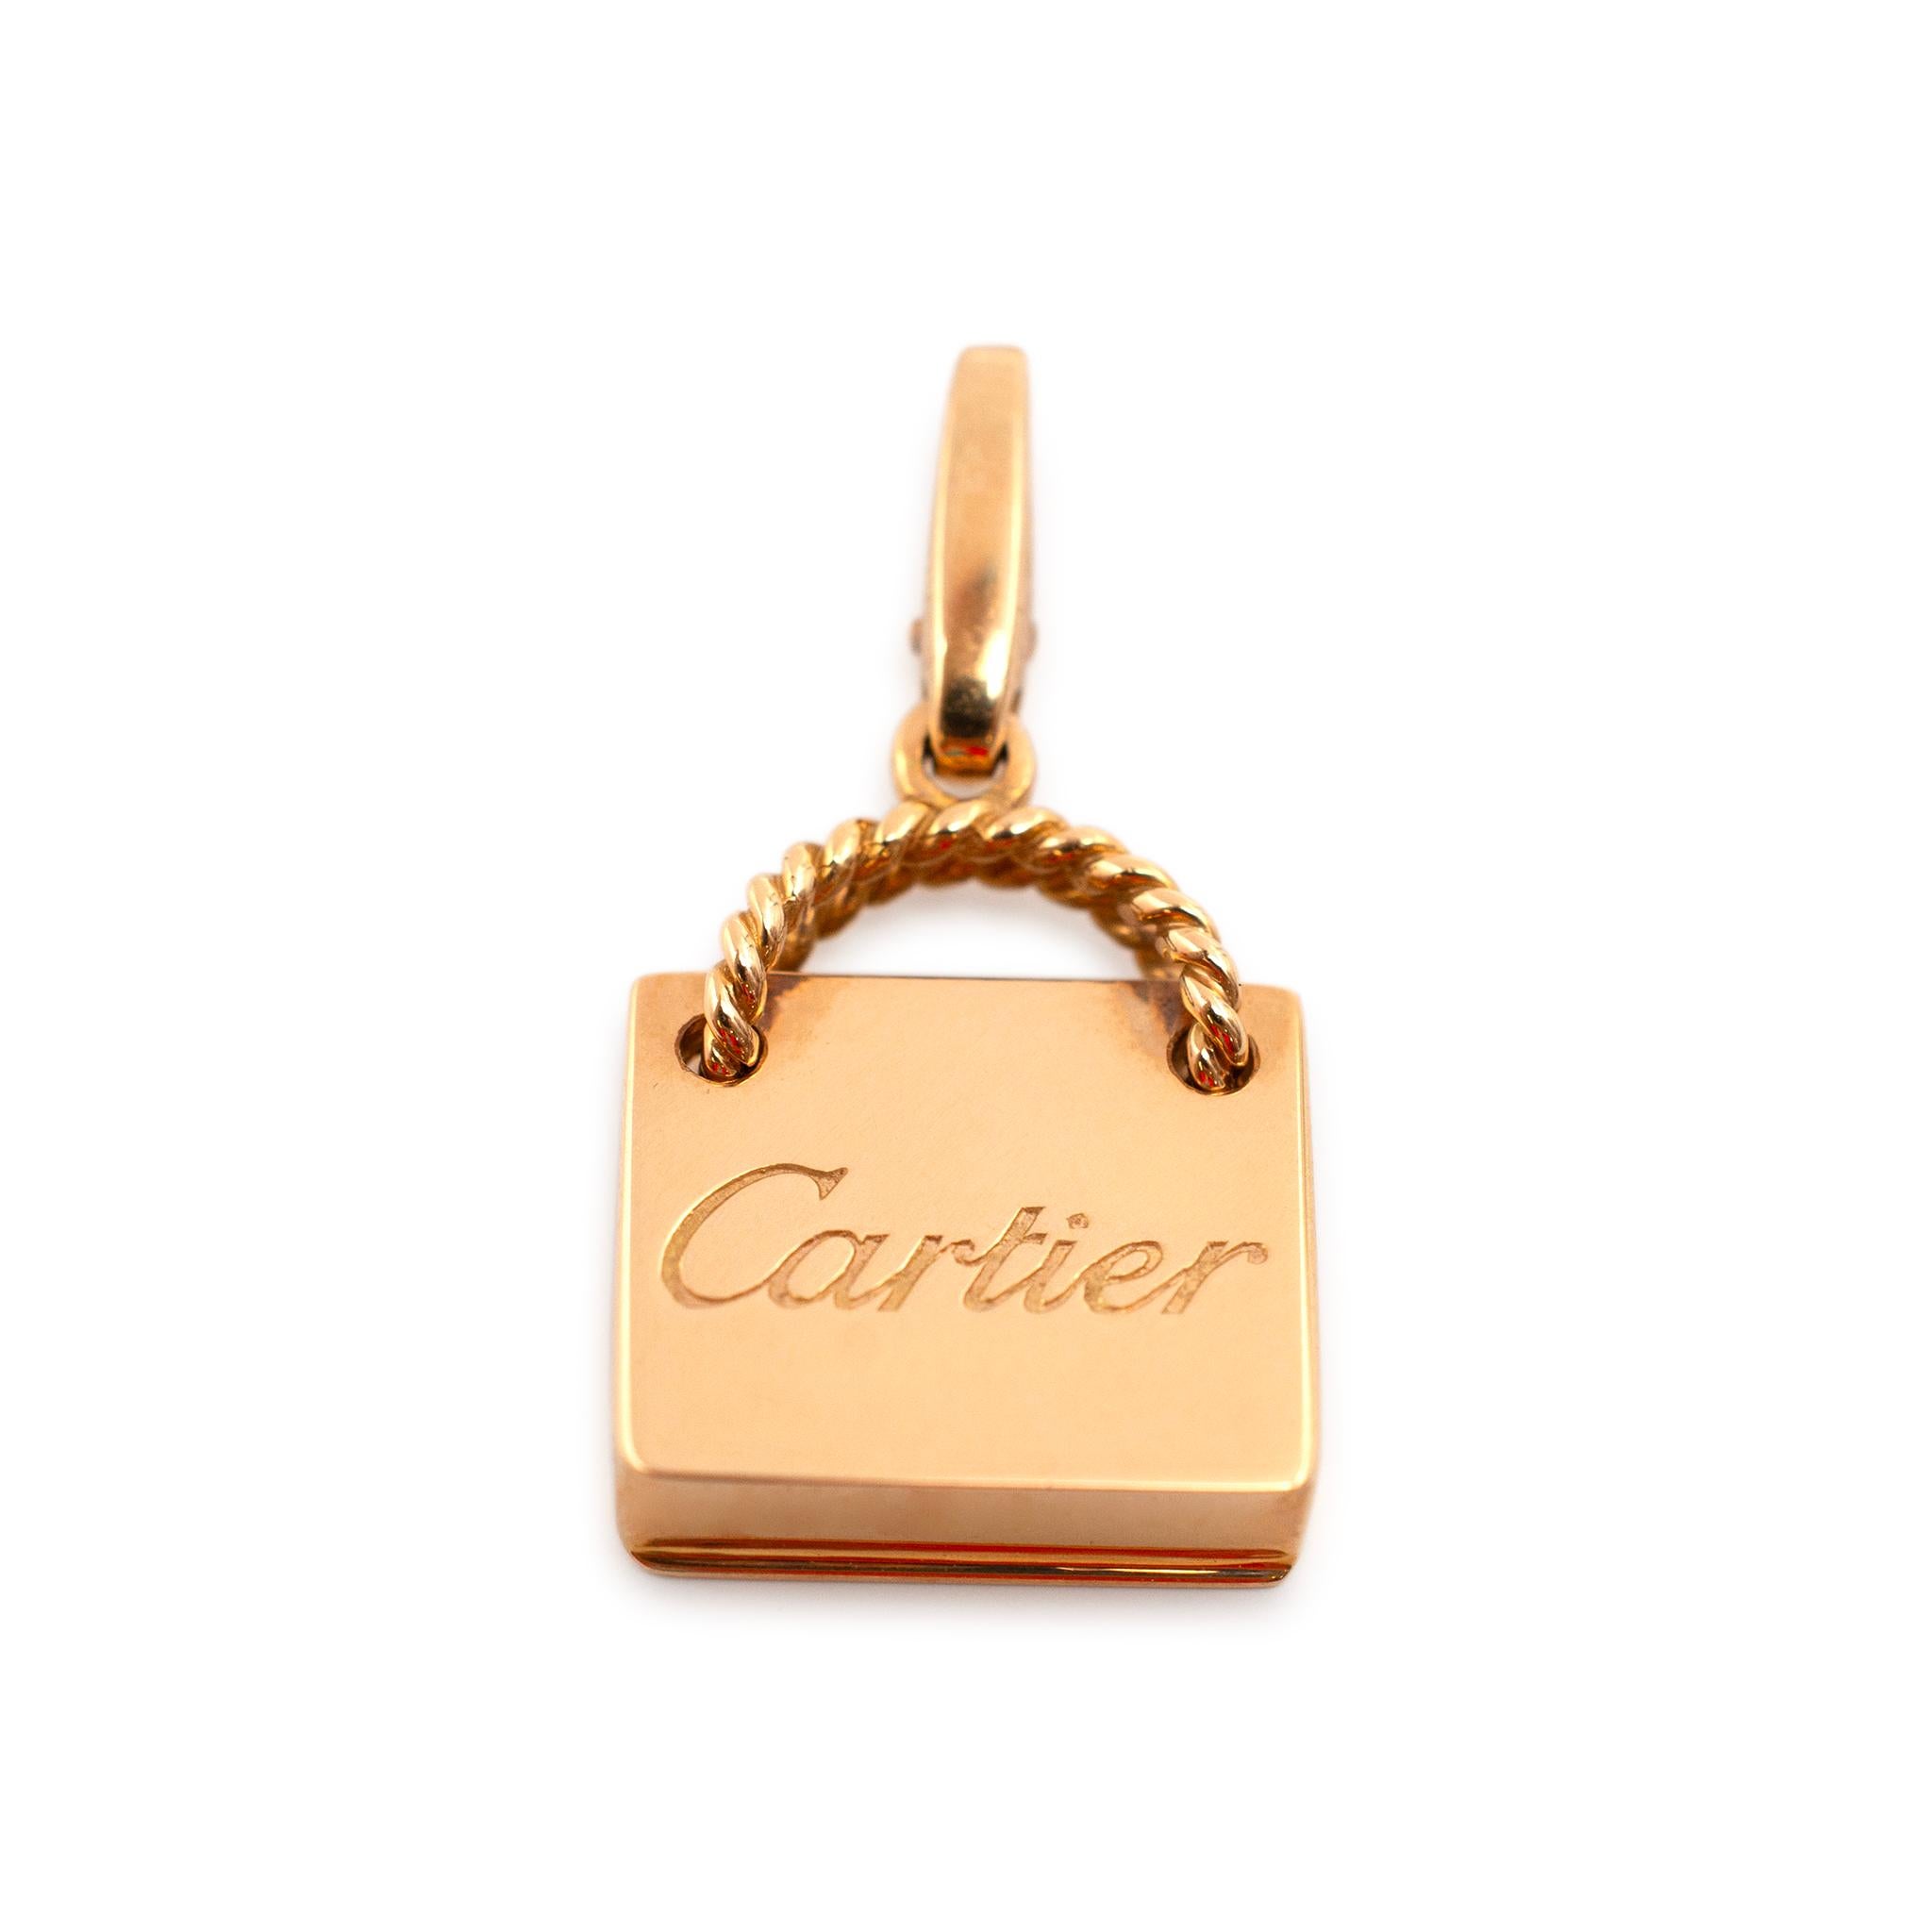 Brand: Cartier

Gender: Ladies

Metal Type: 18K Rose Gold

Length: 1.00 Inches

Width: 14.50 mm 

Weight: 4.69 grams

Ladies designer made polished 18K rose gold, contemporary-style charm. Engraved with 